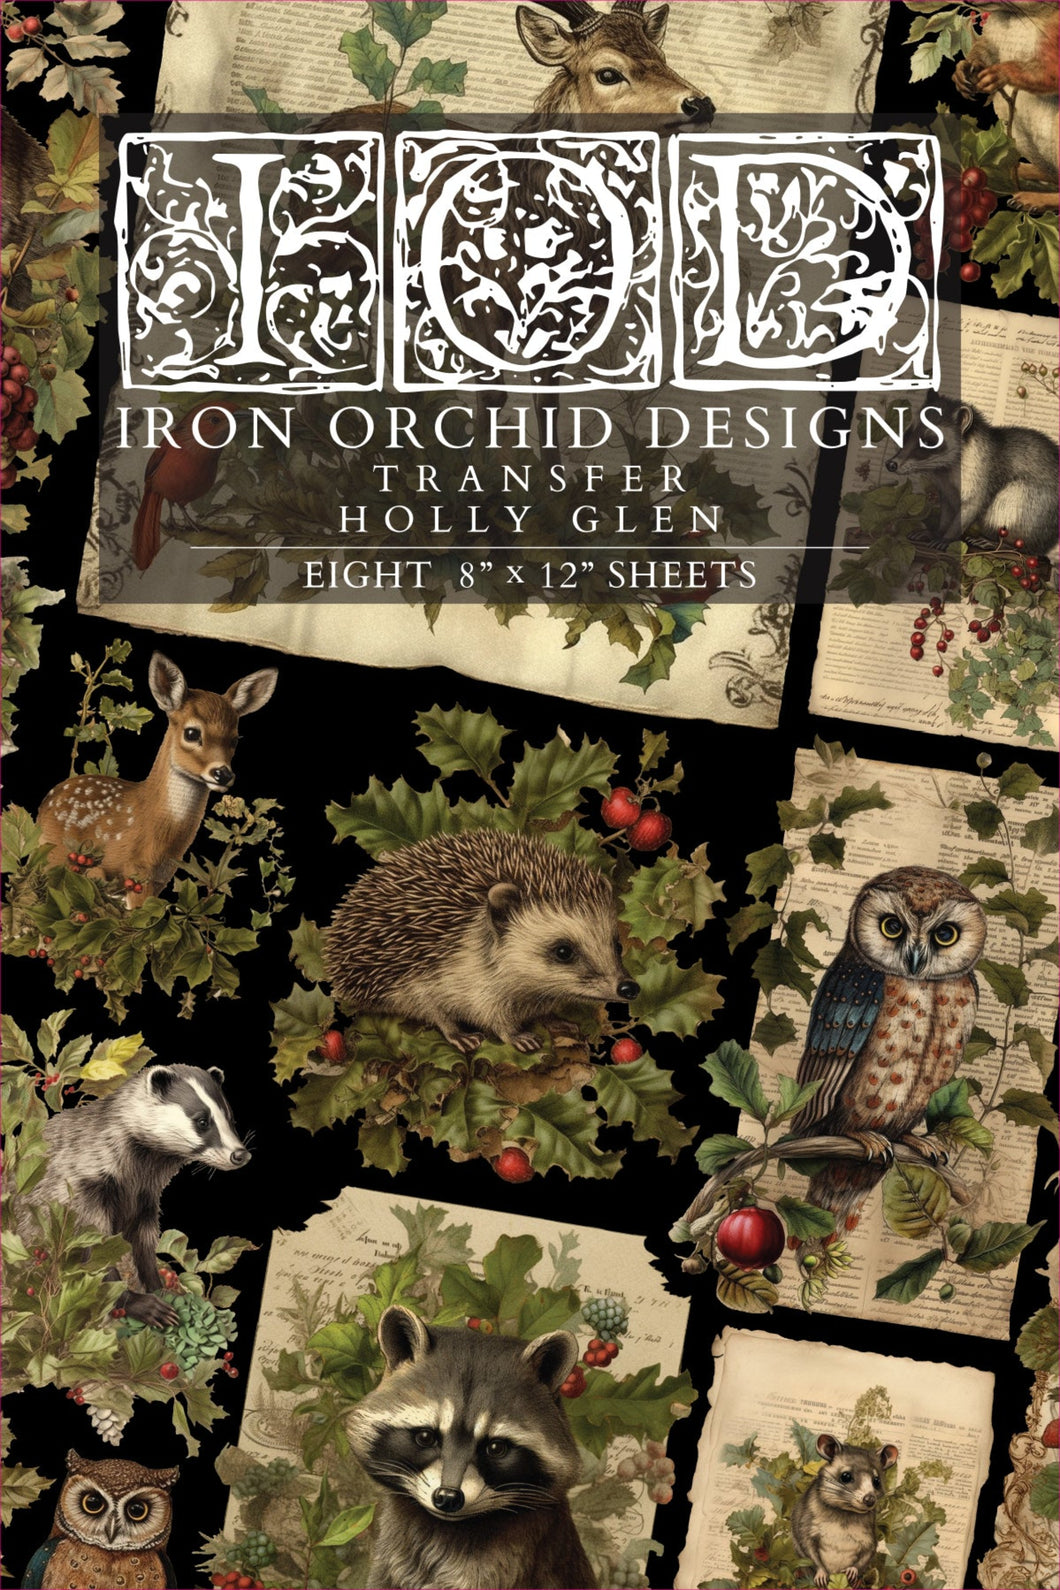 Holly Glen Transfer by IOD, Iron Orchid Designs